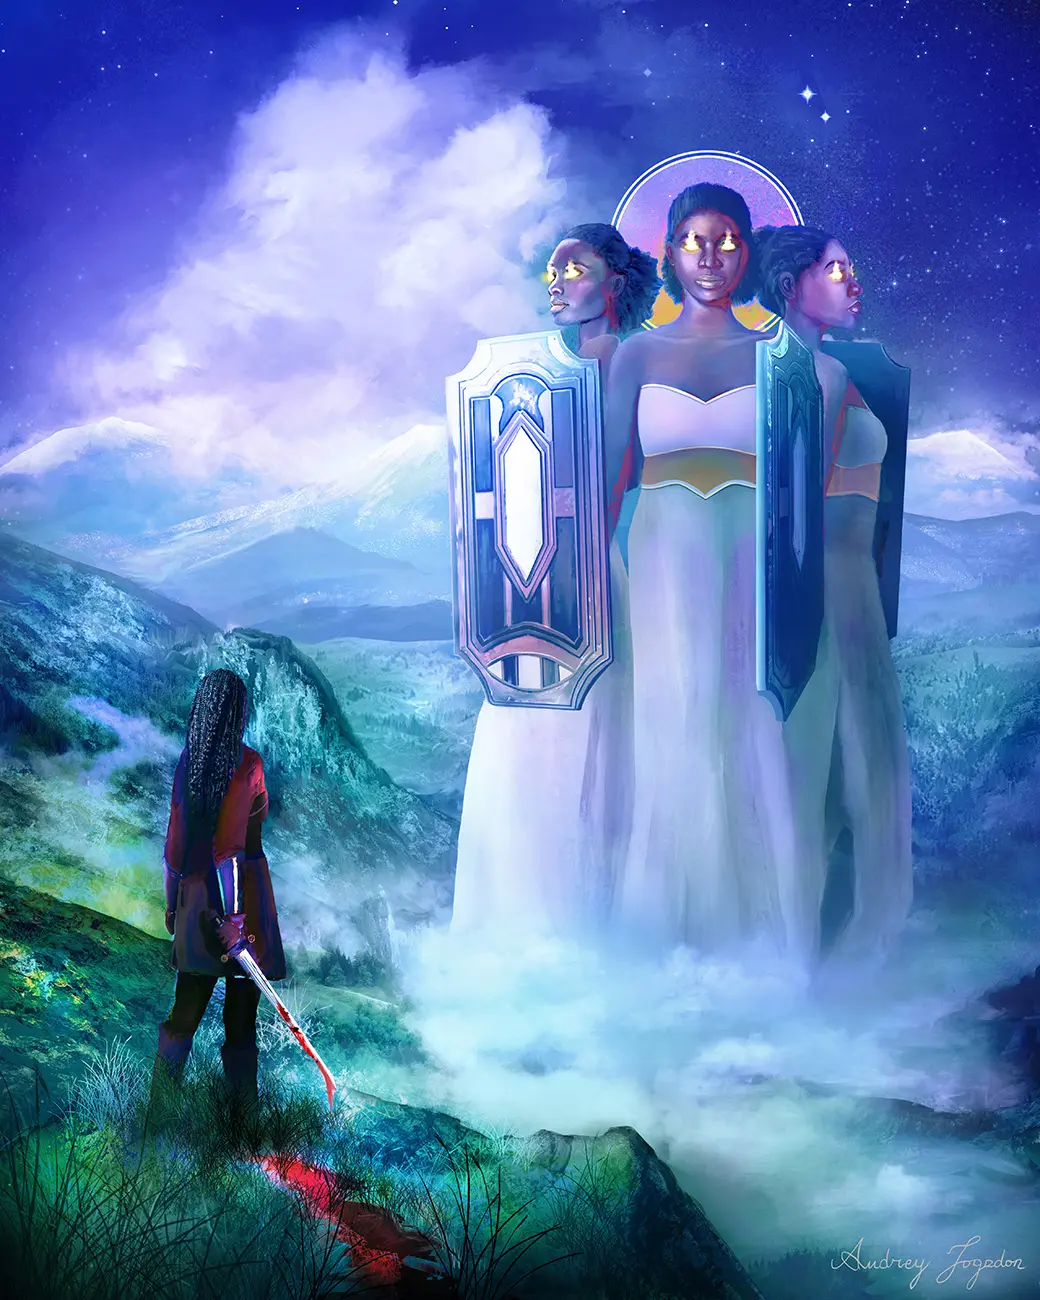 Three colossal black women with glowing yellow eyes holding shields stand framed by a central halo. In the foreground, another Black woman stands, bloody sword in hand, regarding the goddess.